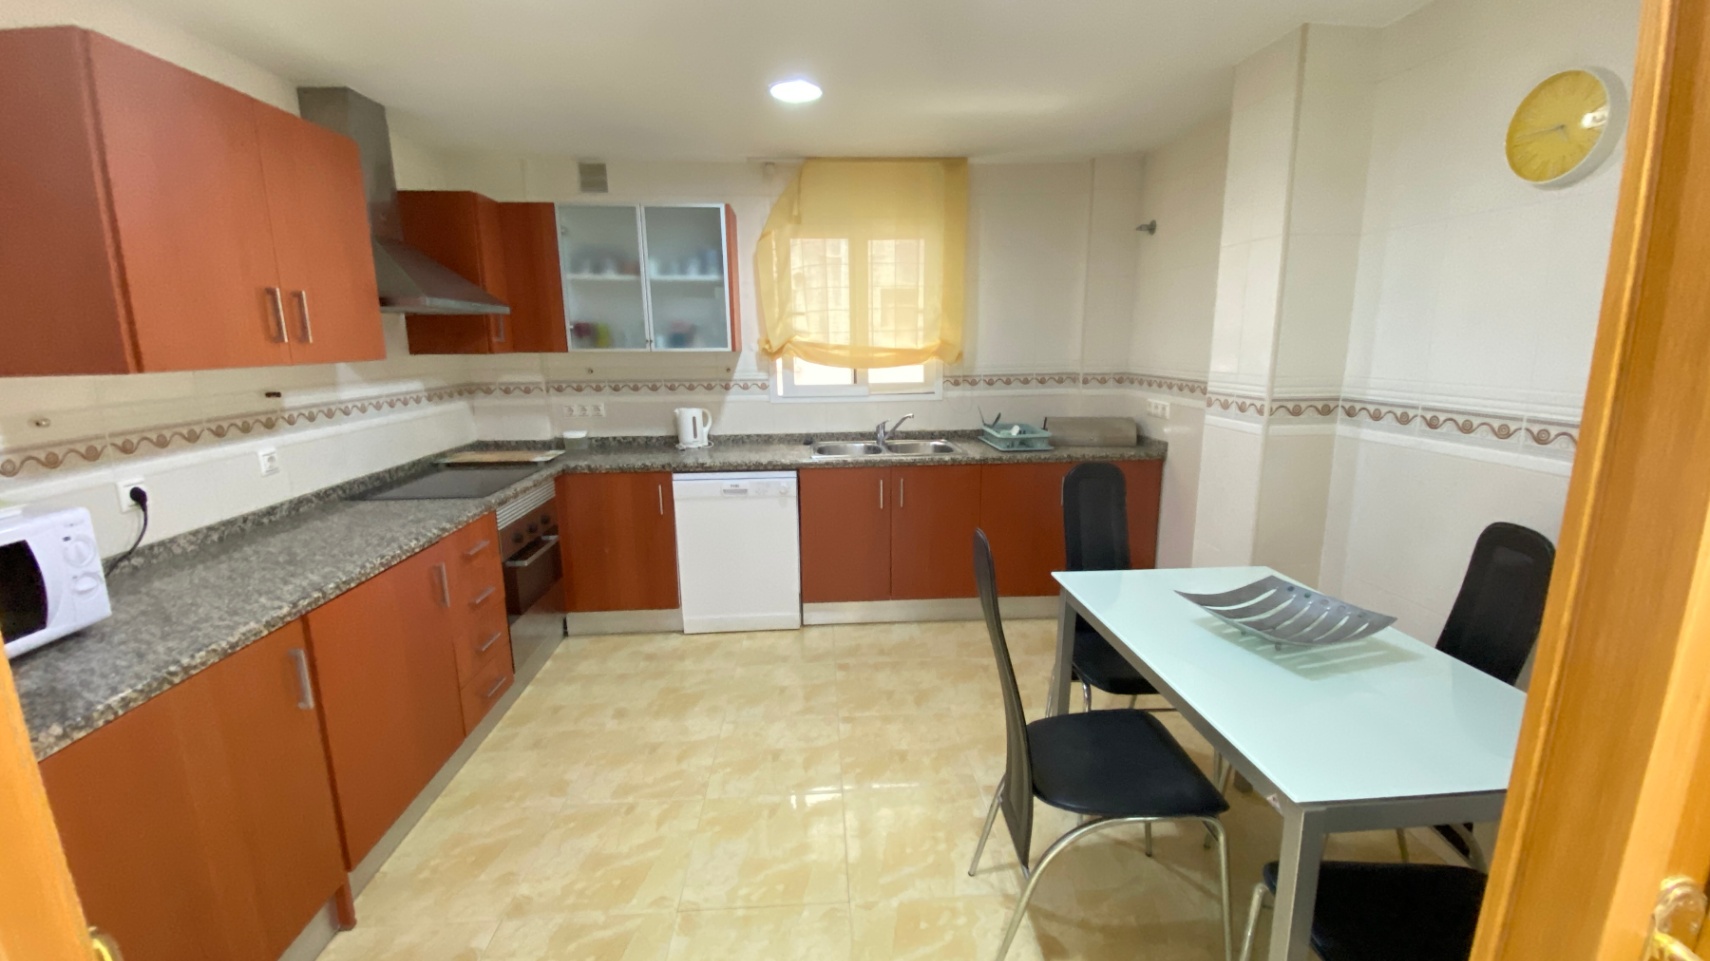 Spacious apartment, 300 meters from Arenal beach in Calpe. The house has an area of 200m2 and consists of 4 bedrooms, 3 bathrooms, large living room, very large independent kitchen, 2 terraces, laundry room. Gas central heating. The building has a communal swimming pool. There is the possibility to buy 2 parking spaces for €25,000 each.